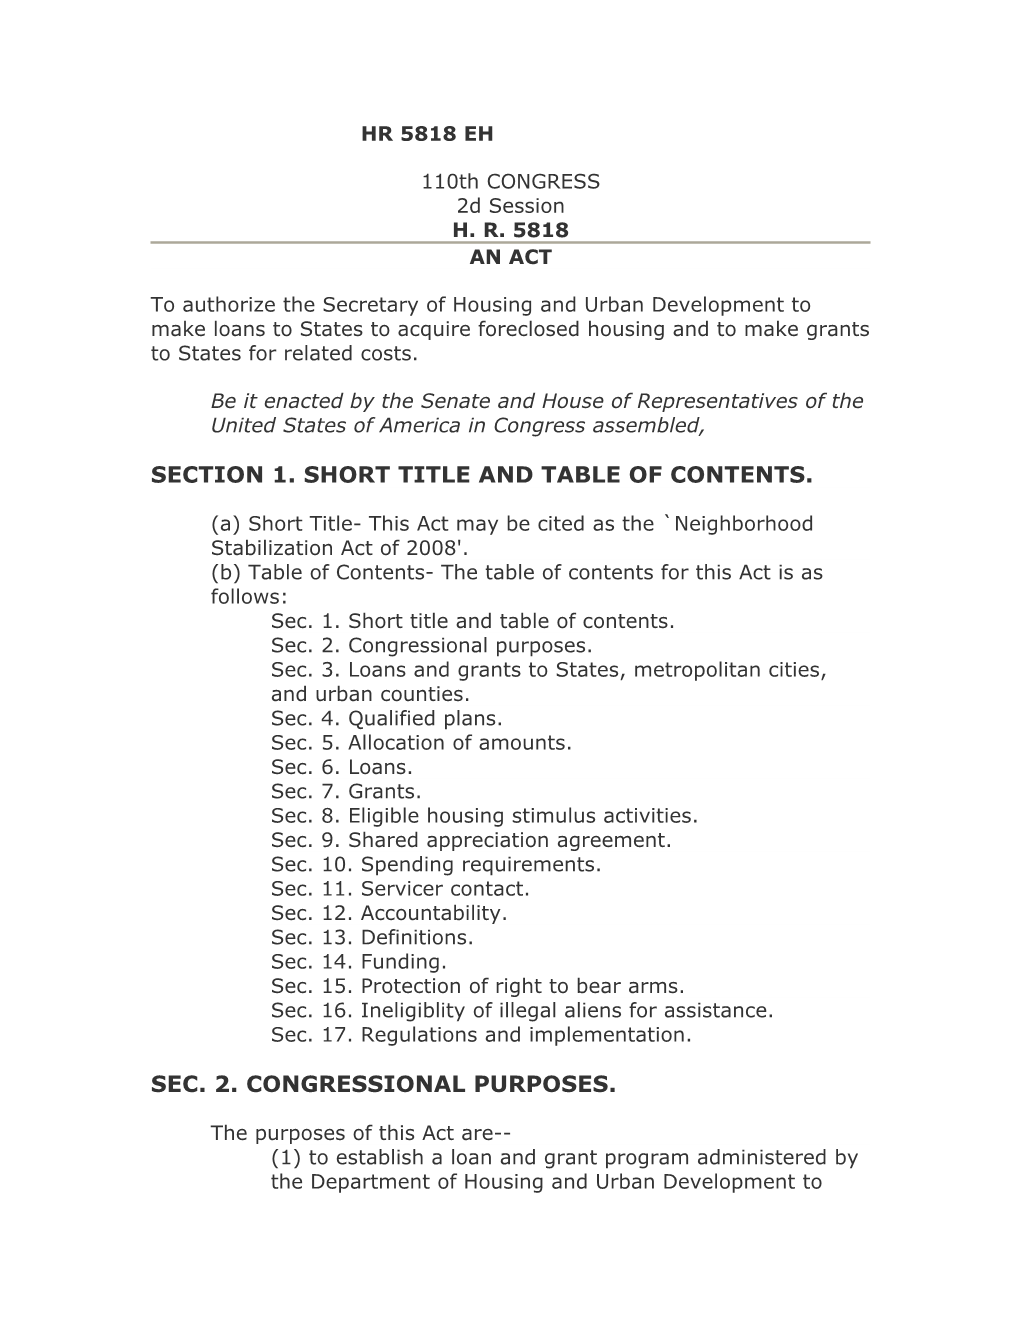 Section 1. Short Title and Table of Contents